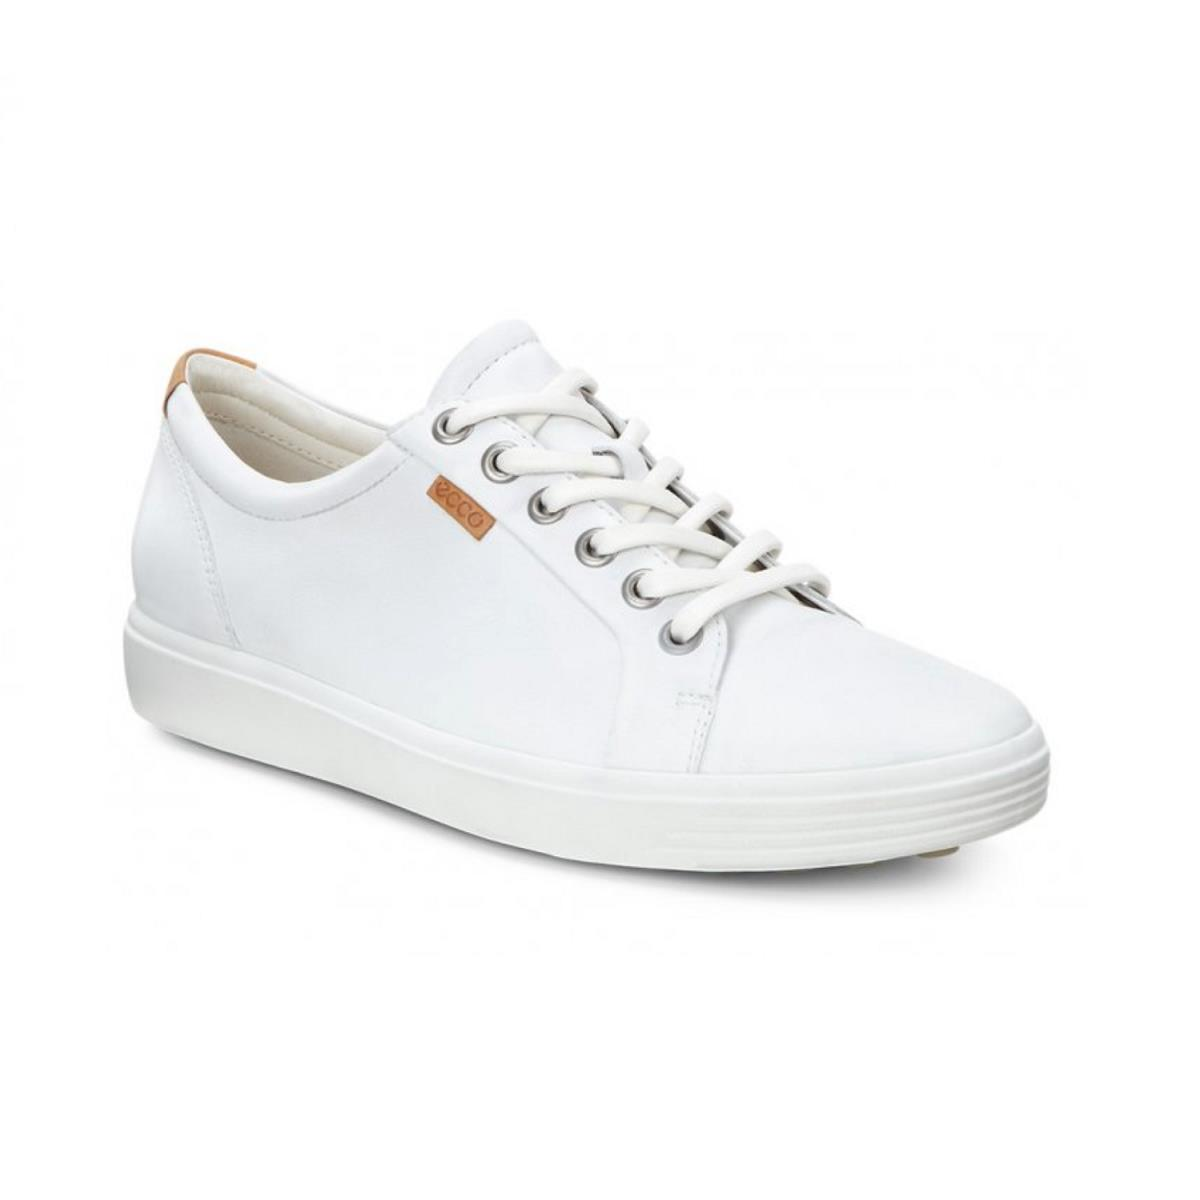 ECCO SOFT 7 WHITE - Women sneakers - Collective Shoes 